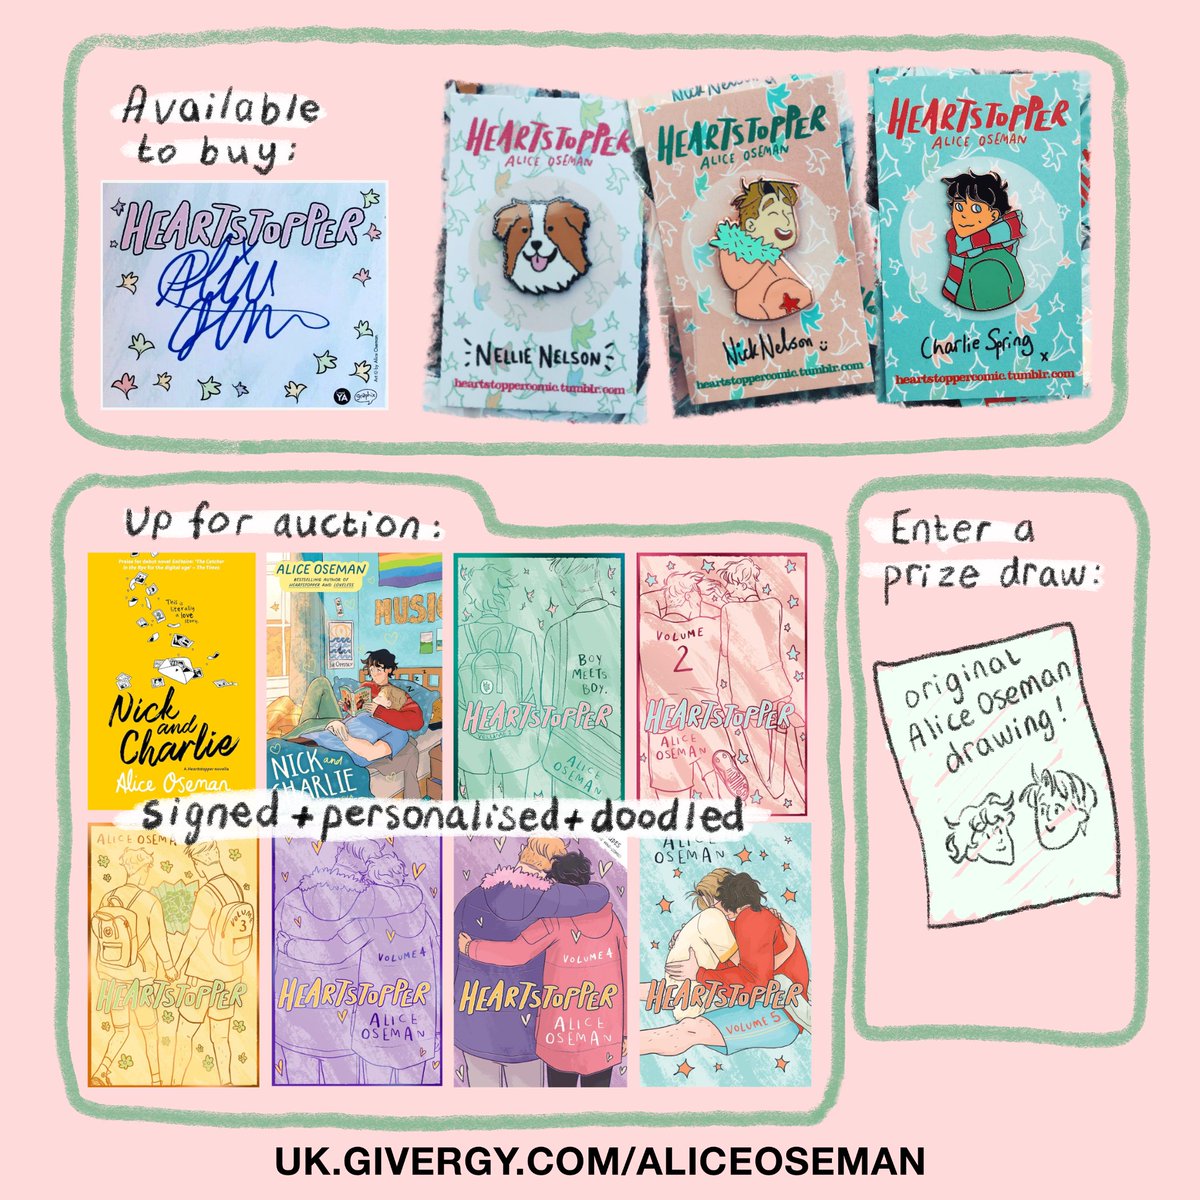 Organized by @aliceoseman, the 'Not Alone' fundraiser supporting Children in Gaza is now live. Signed bookplates and Heartstopper enamel pins are sold out, but you can still bid on signed/doodled books and win an original drawing by Alice Oseman👇 uk.givergy.com/aliceoseman/?c…